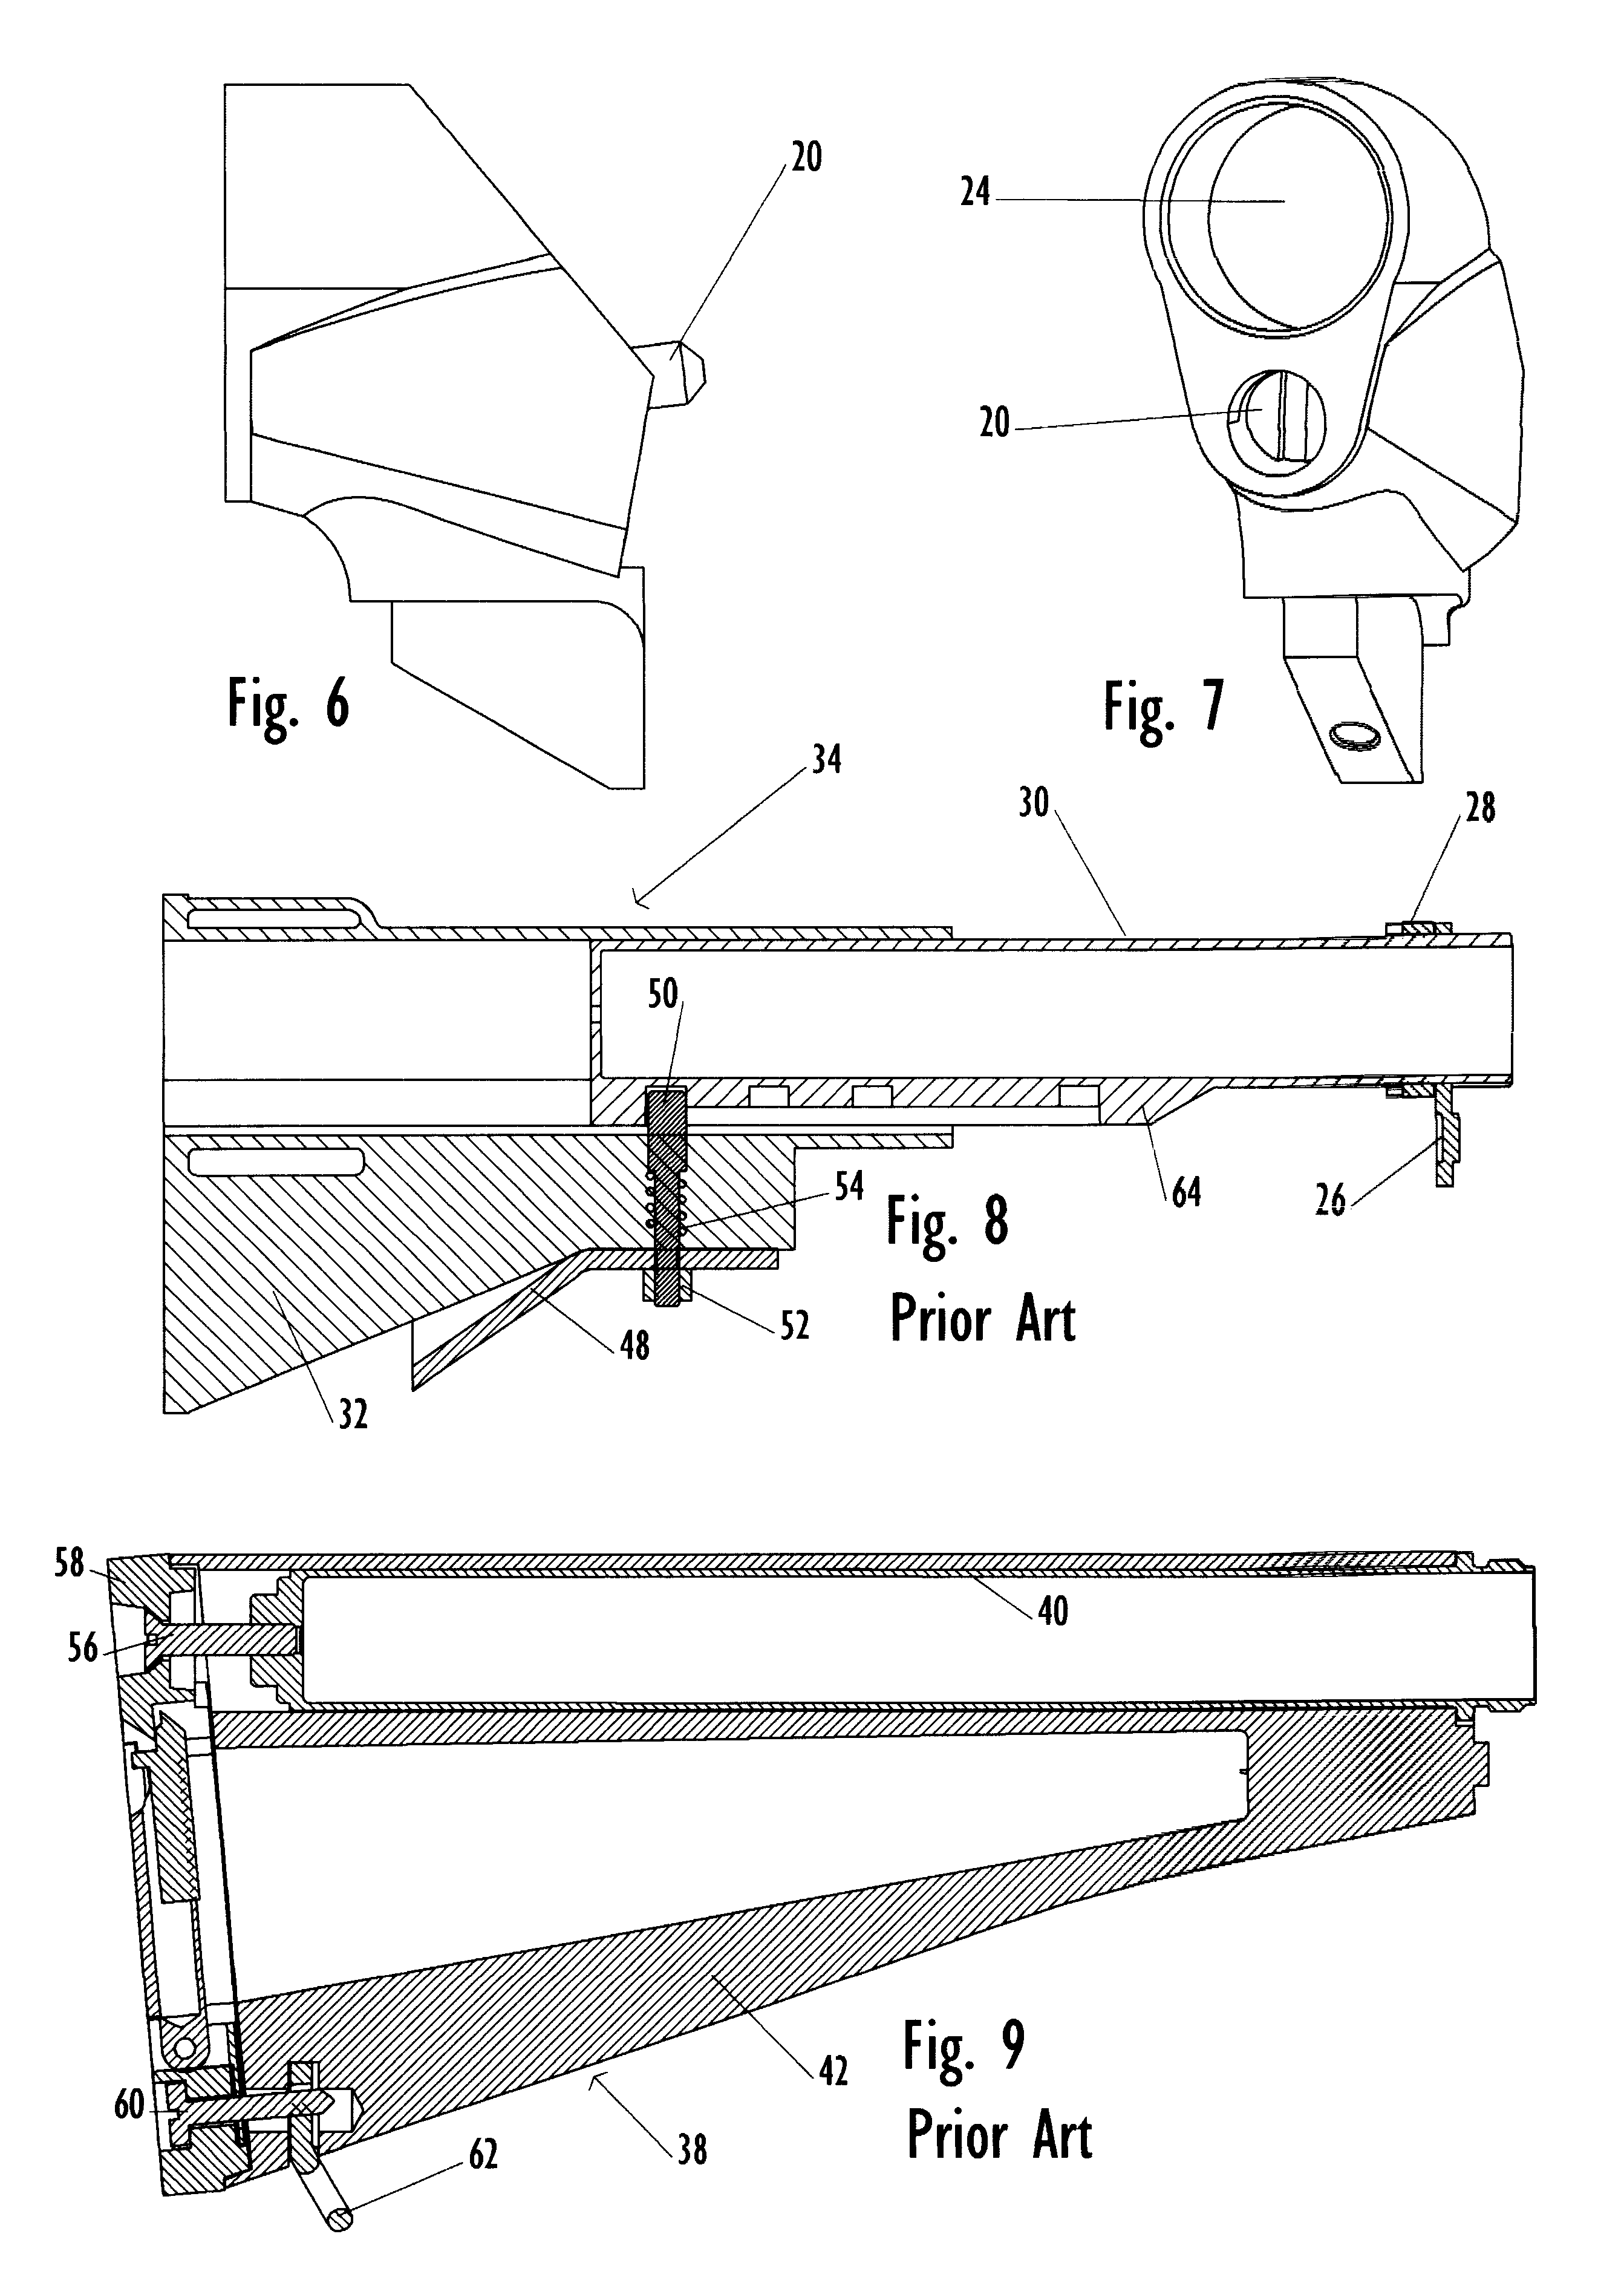 Firearm interface for a buttstock and pistol grip